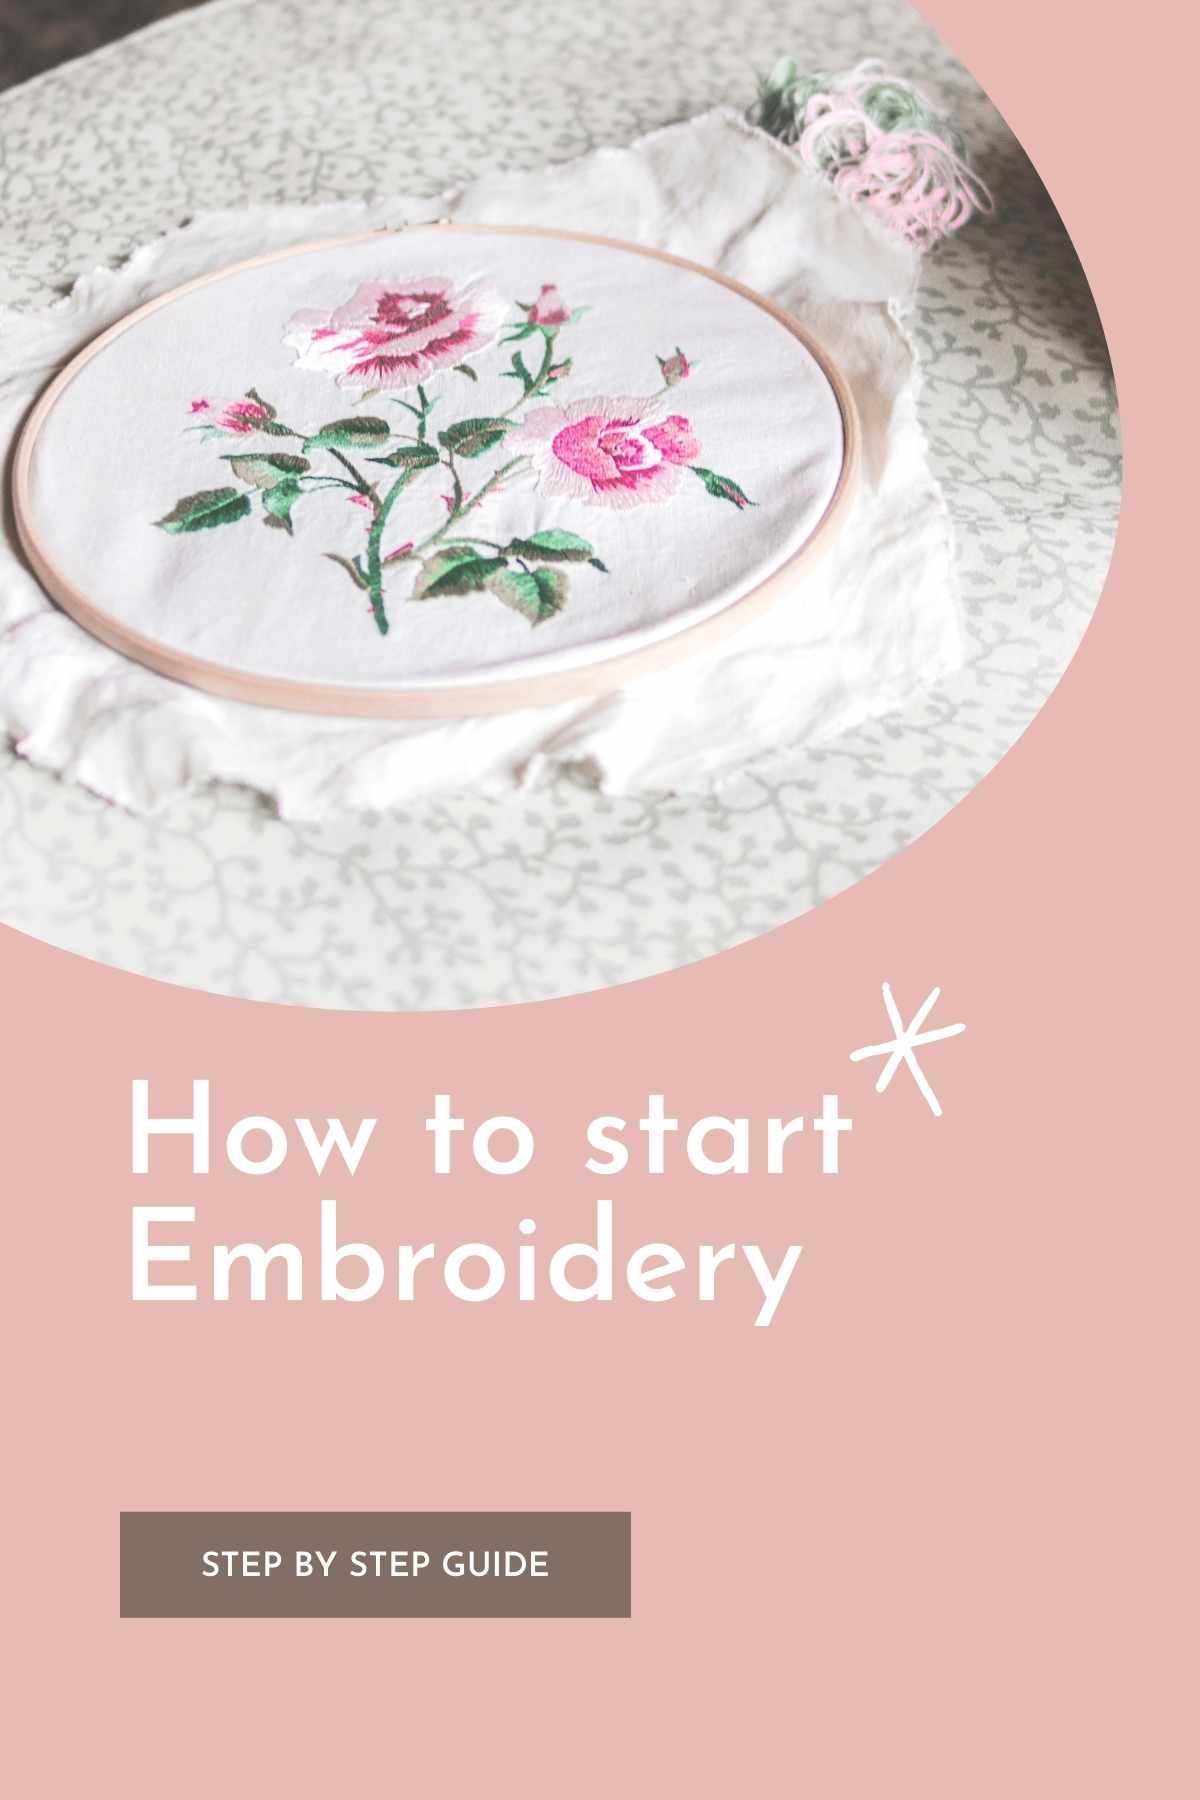 How to start embroidery - a step by step guide